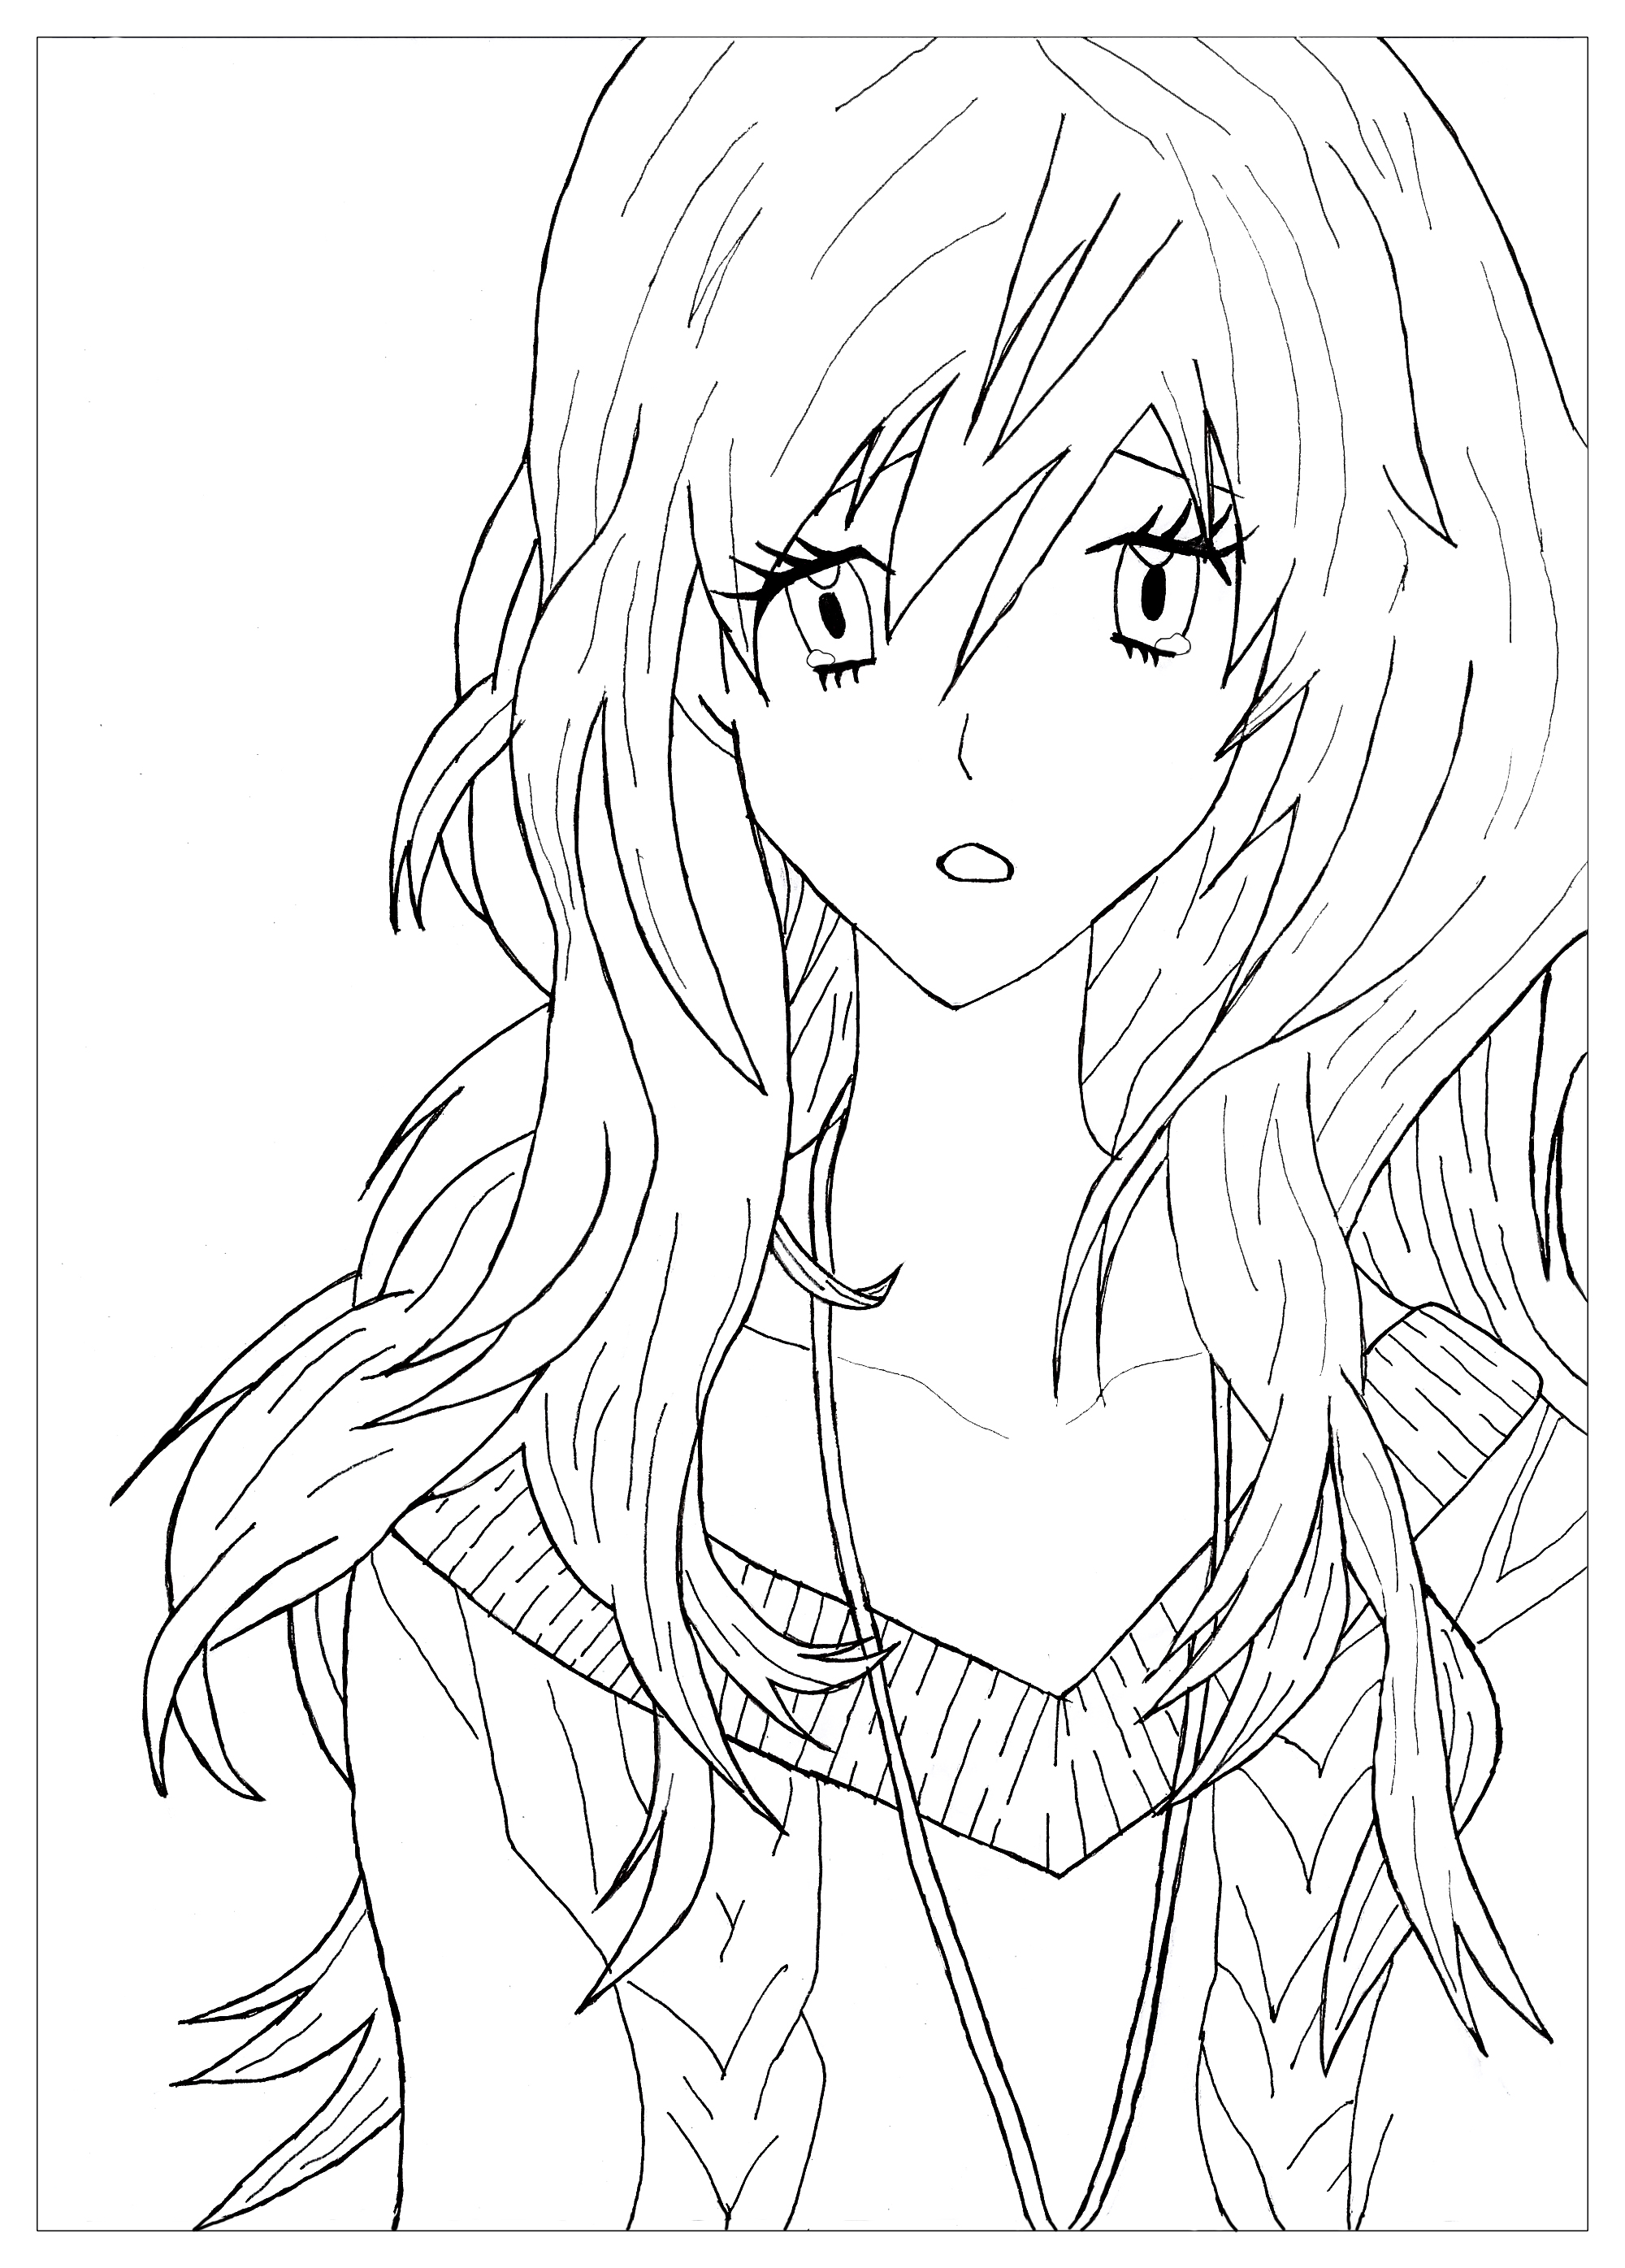 Young Anime Girl Coloring Page | Easy Drawing Guides